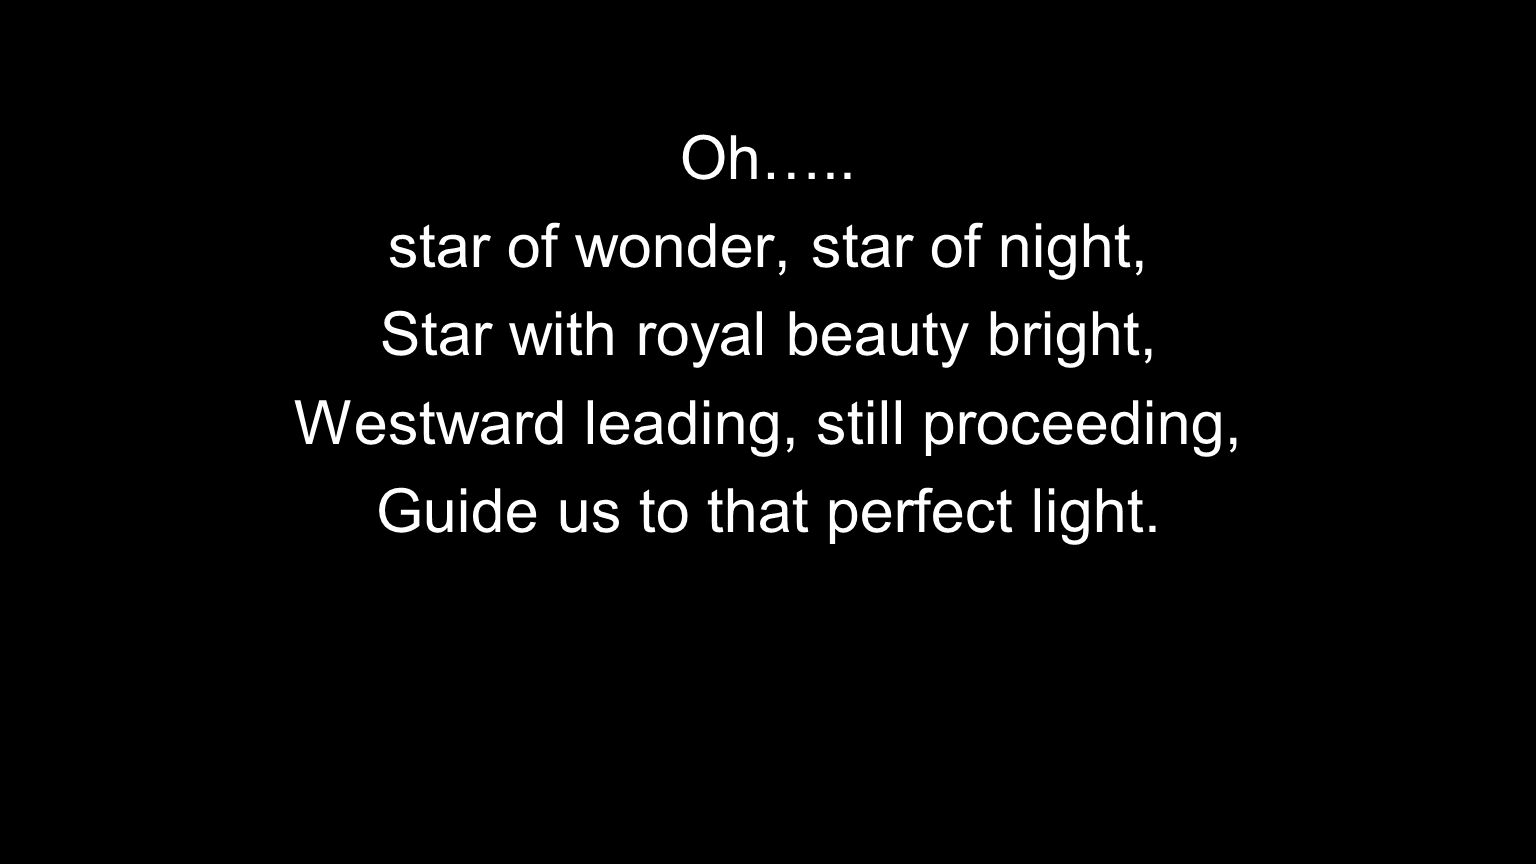 star of wonder, star of night, Star with royal beauty bright,